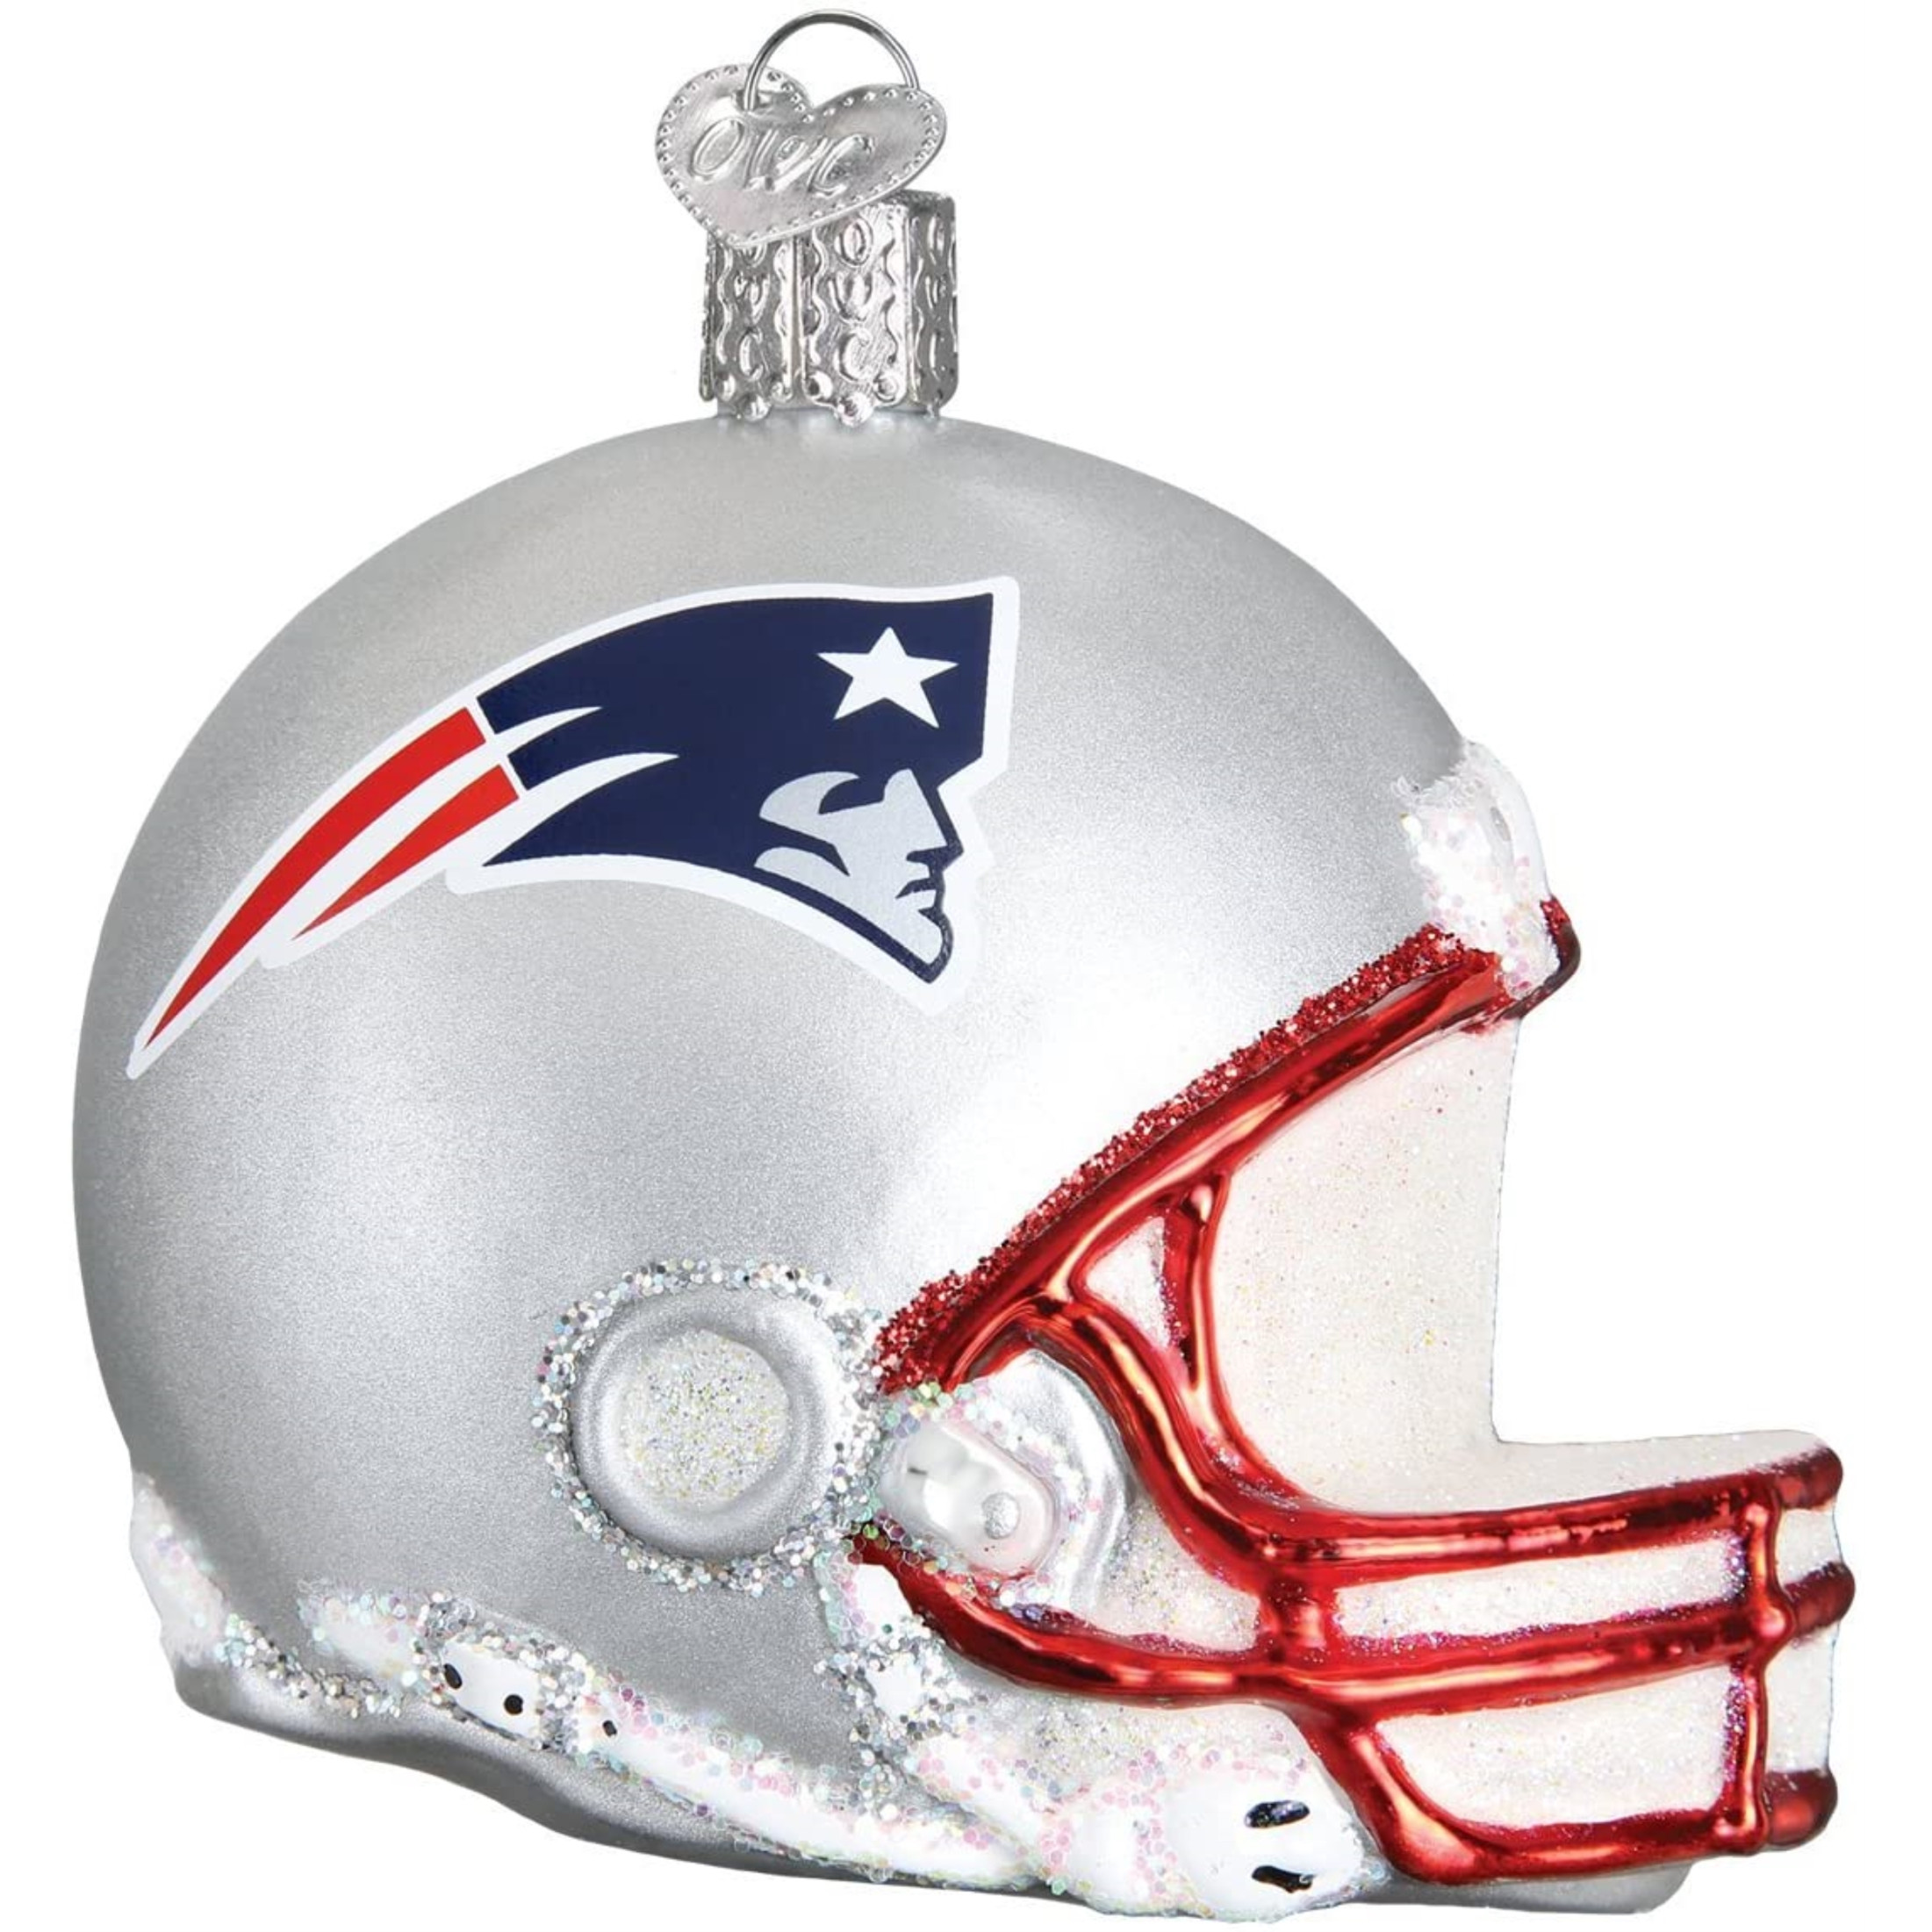 Old World Christmas Glass Blown Ornament For Christmas Tree, New England Patriots Helmet (With OWC Gift Box)